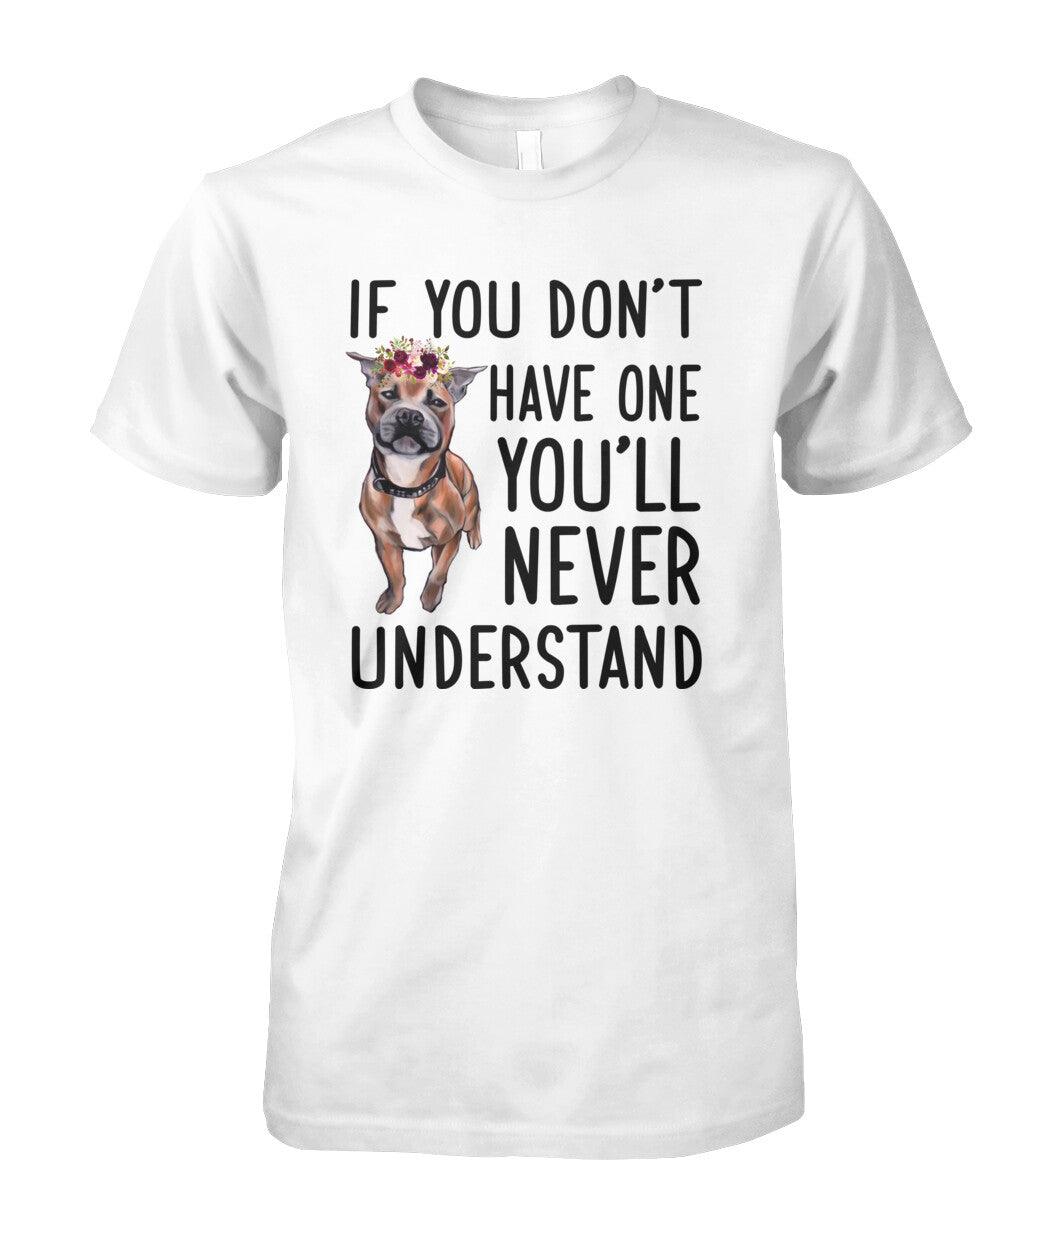 Staffordshire Bull Terrier Unisex T Shirt - Staffordshire If You Don't Have One You'll Never Understand Unisex T Shirt - Gift For Staffordshire Lovers - Amzanimalsgift